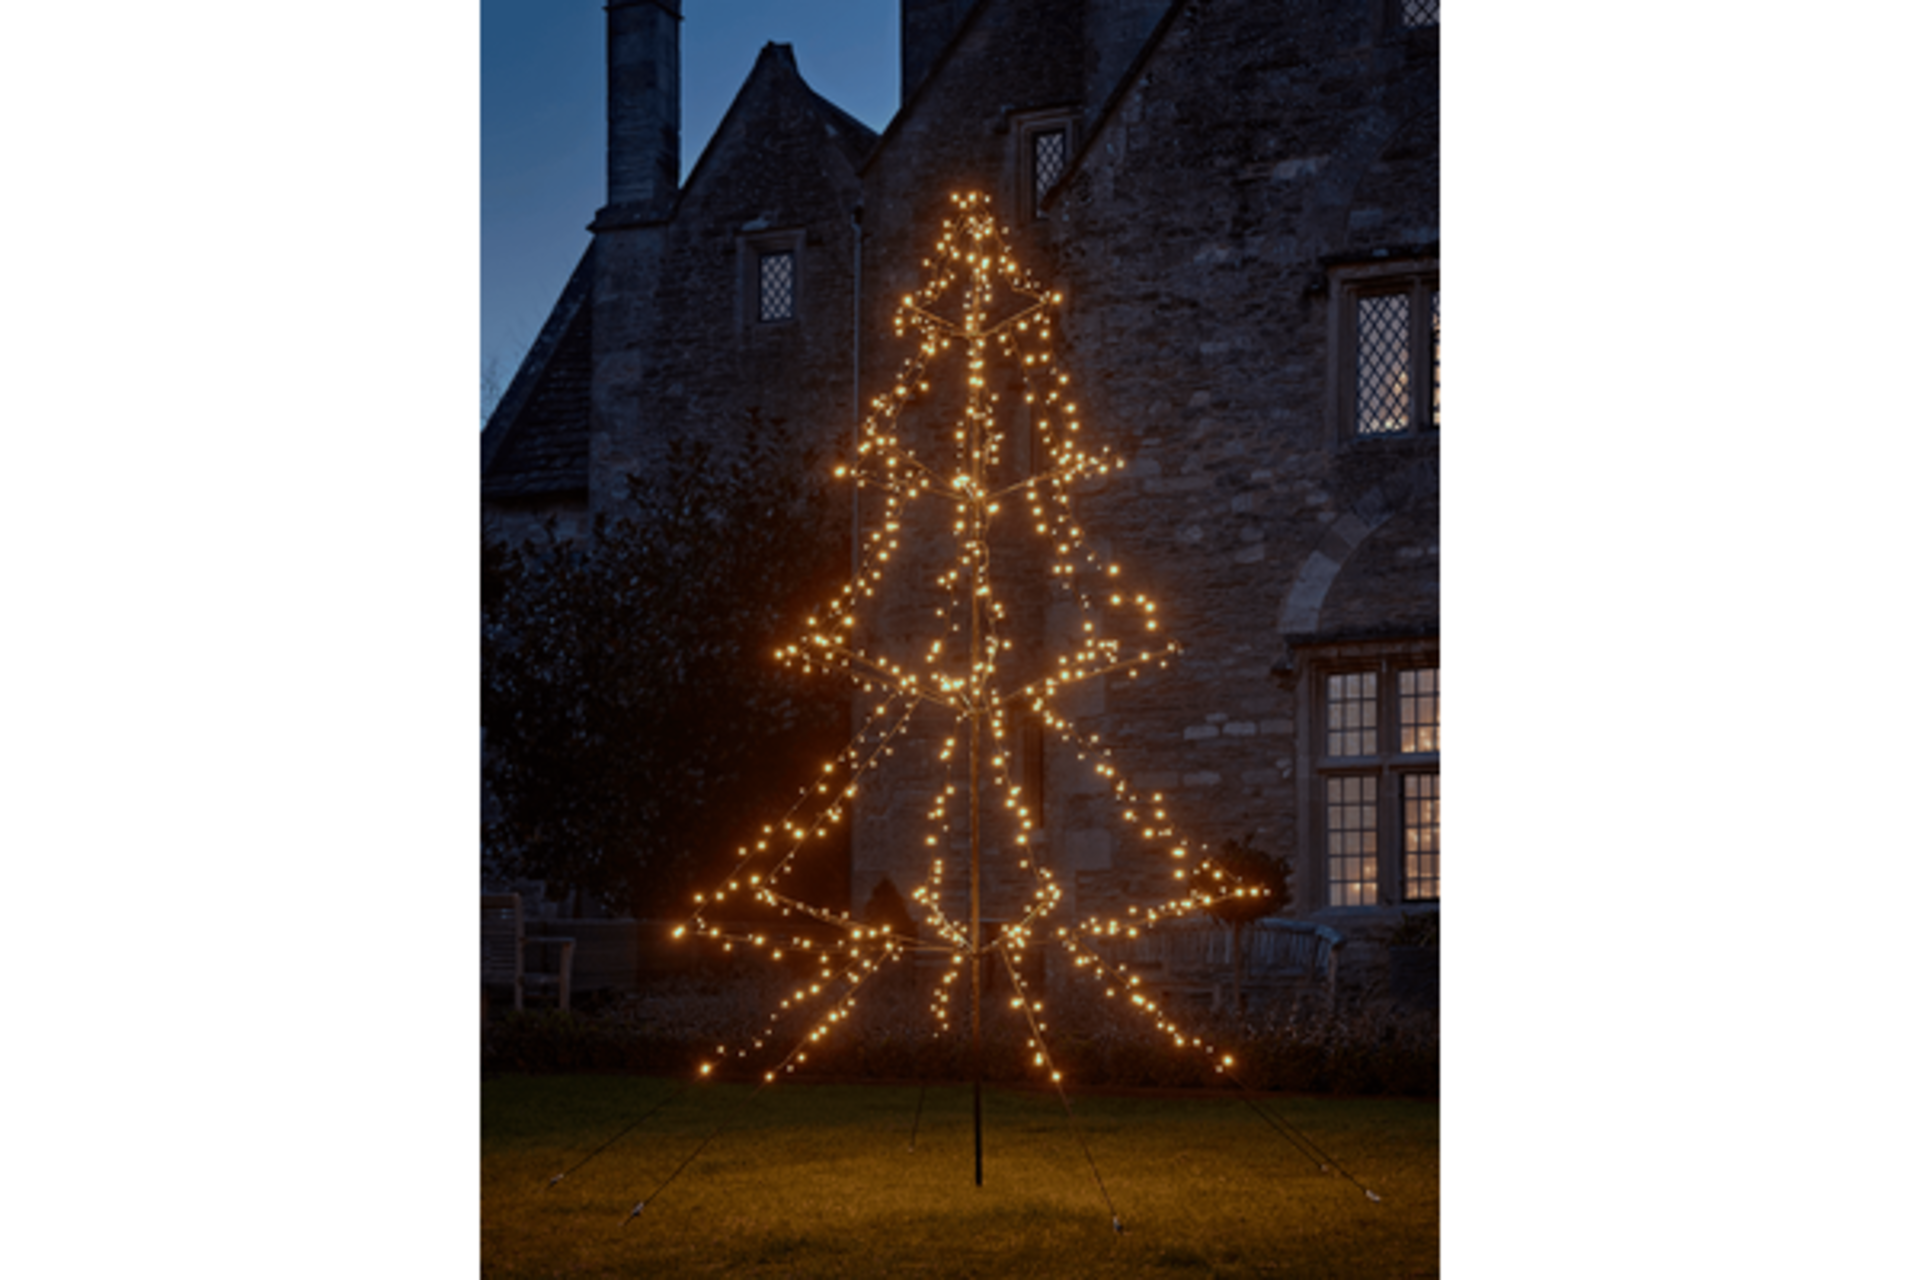 Cox & COx Outdoor Light Up Tiered Tree 3m. RRP £195.00. Magical and majestic, our festive Outdoor